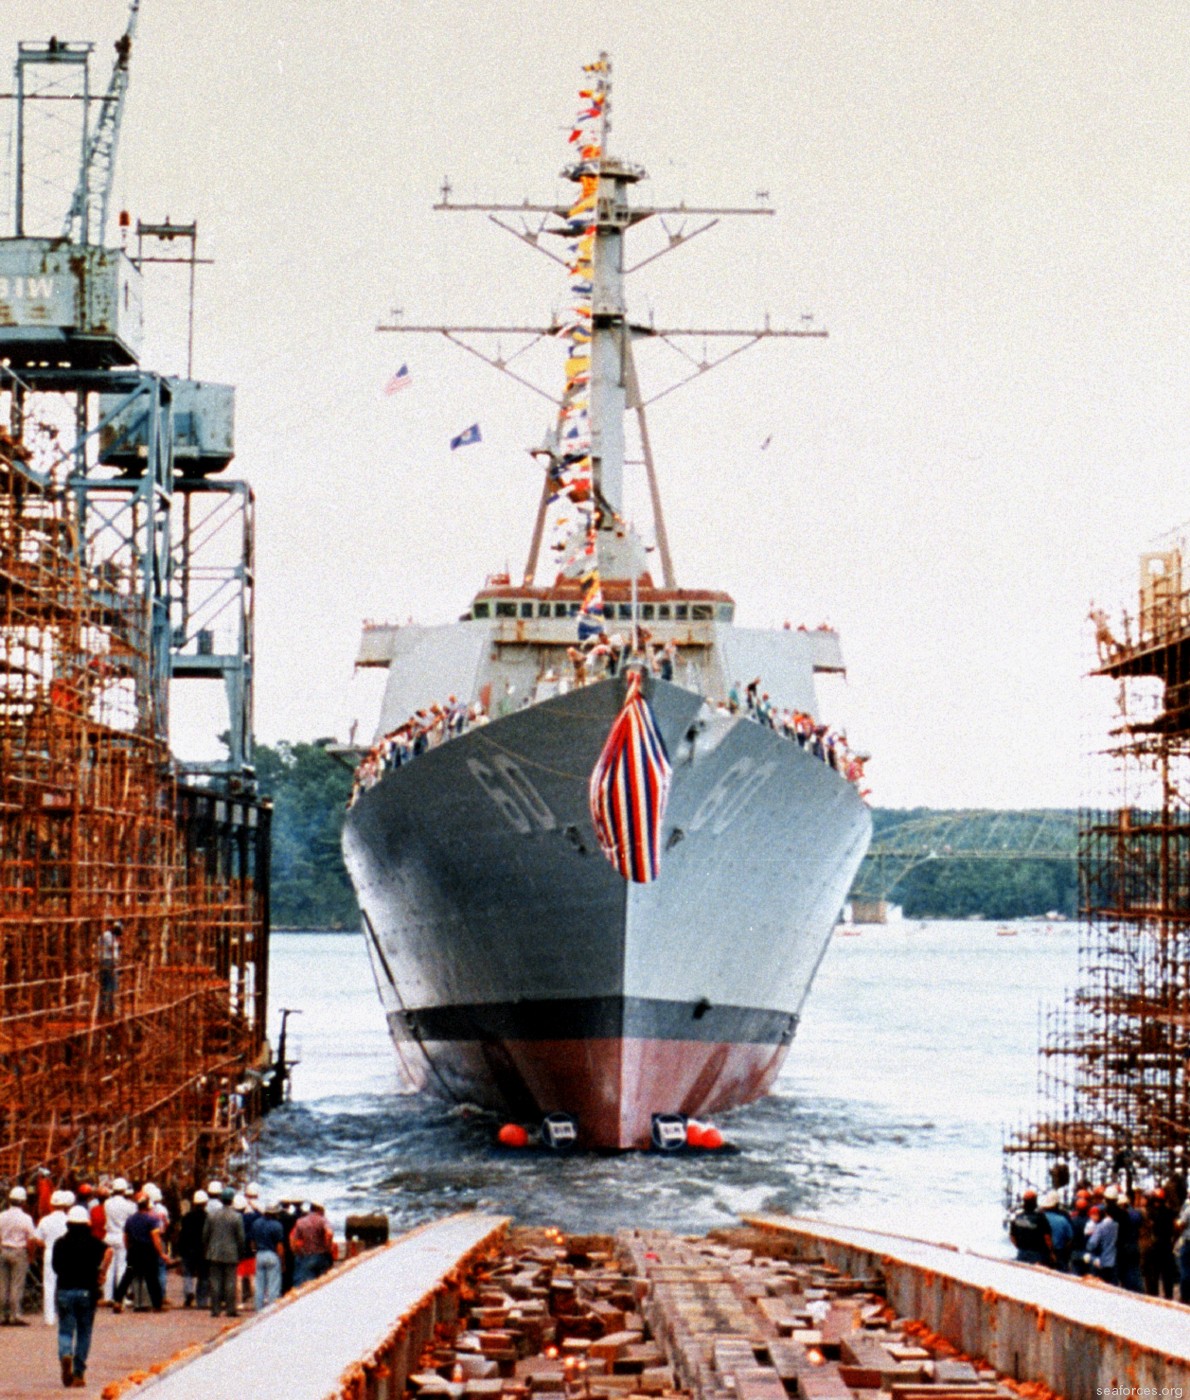 ddg-60 uss paul hamilton guided missile destroyer us navy 59 launching ceremony july 1993